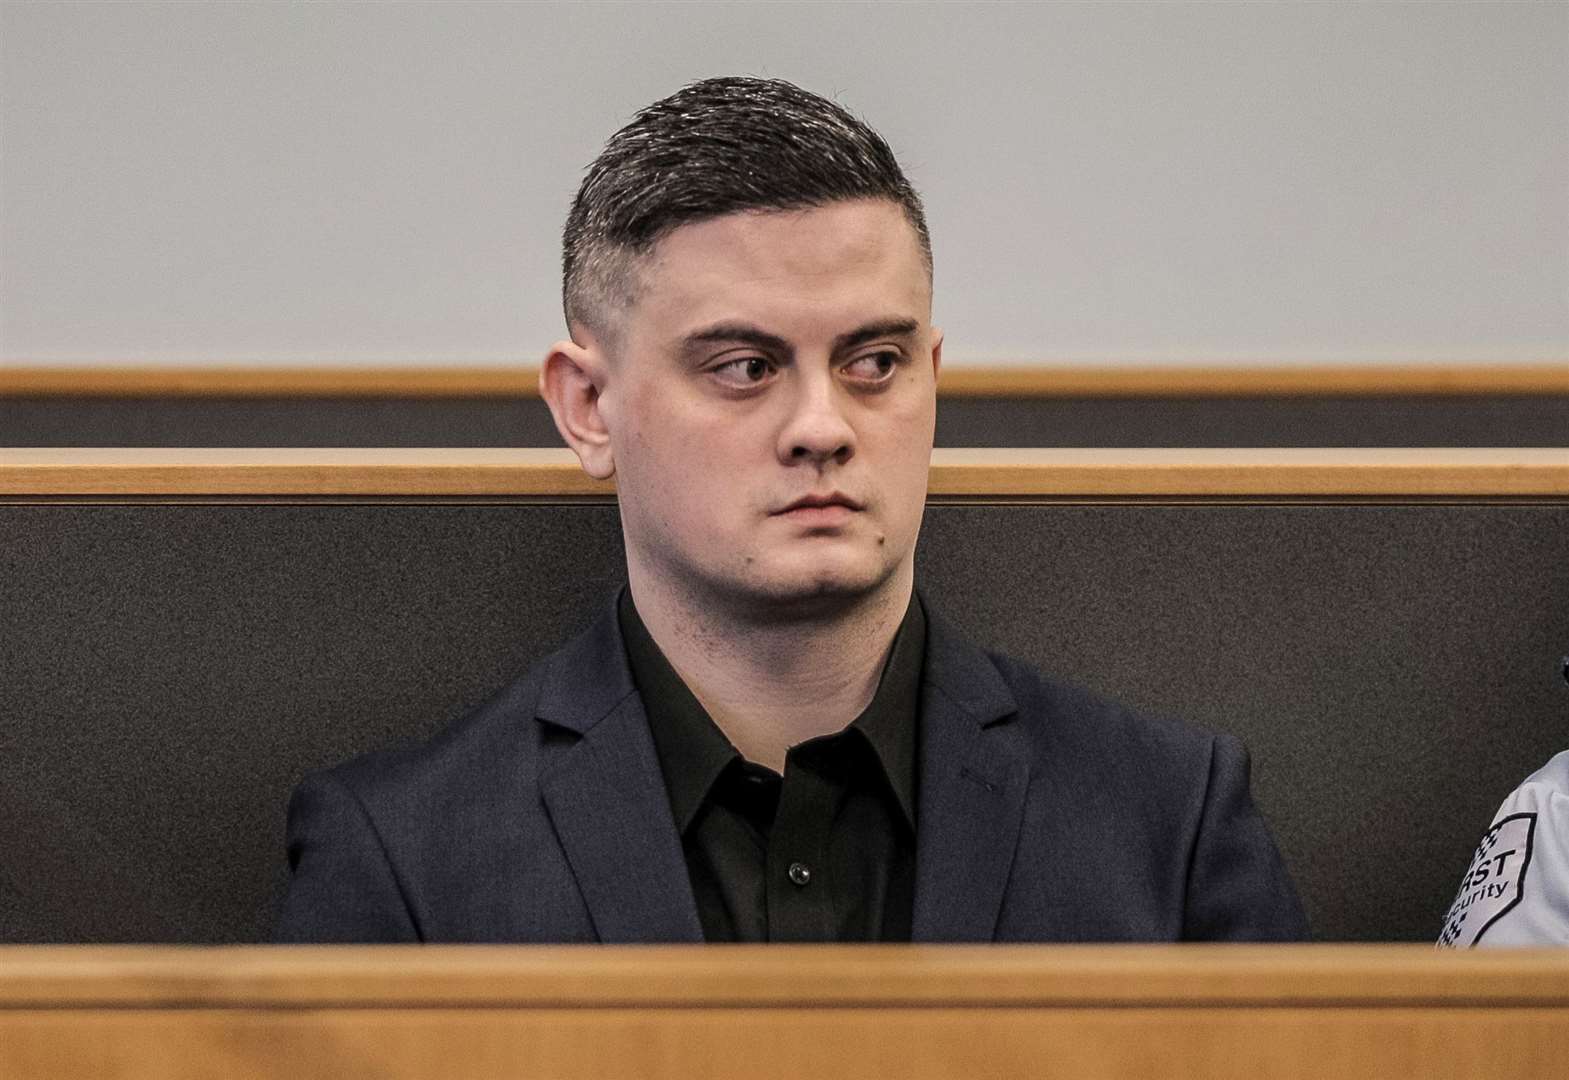 Jesse Shane Kempson sits in New Zealand’s High Court during the trial for the murder of British backpacker Grace Millane (Michael Craig/NZ Herald via AP)